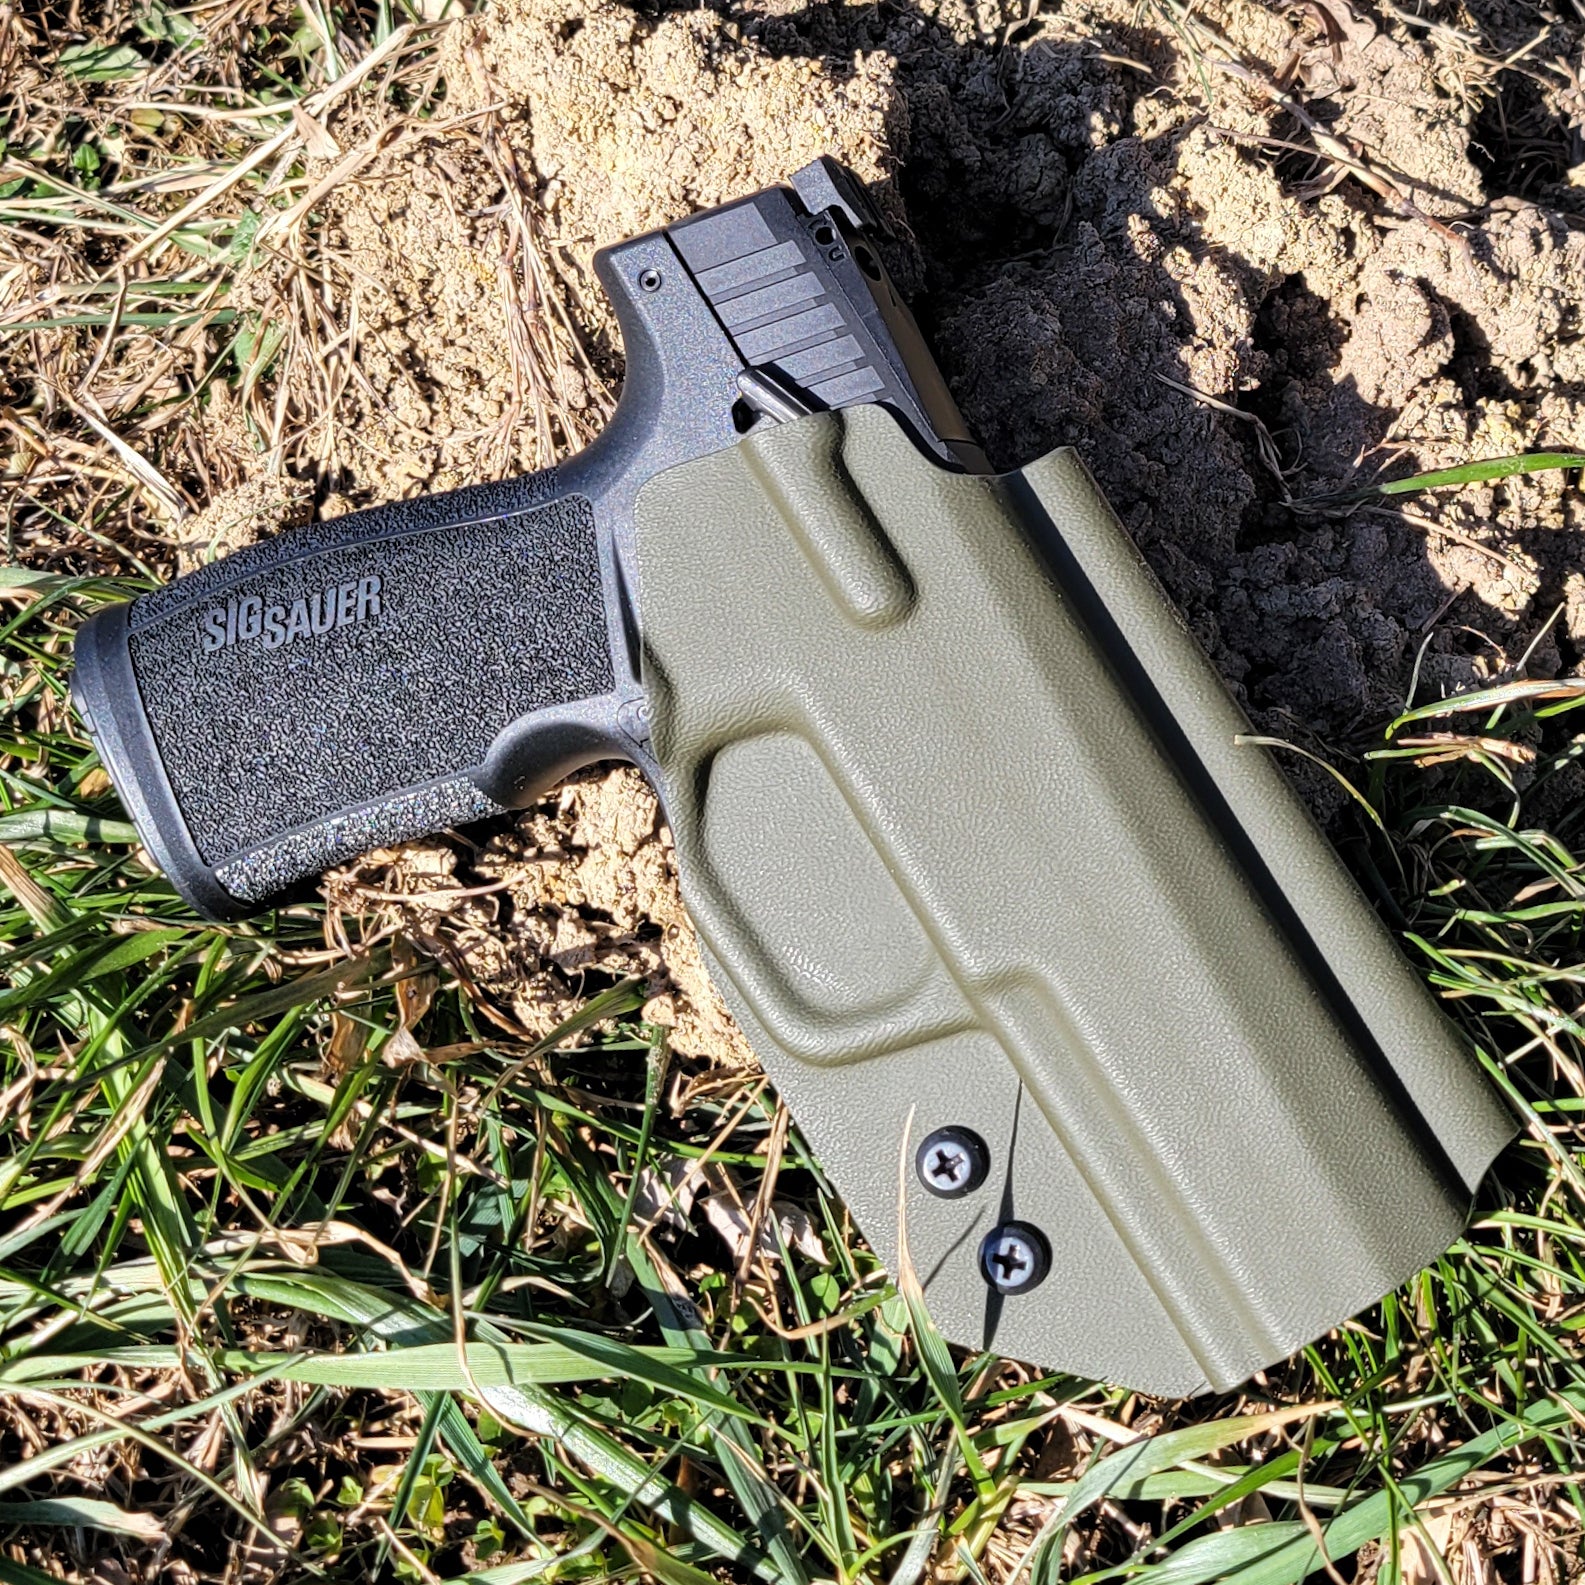 For the best Outside Waistband OWB Kydex Holster designed to fit the Sig Sauer P322 22 Long Rifle Pistol, look to Four Brothers. Perfect for competition shooting. Full sweat guard, open muzzle, adjustable retention, minimal material, & smooth edges to reduce printing. Proudly made in the USA. P 322 22 LR